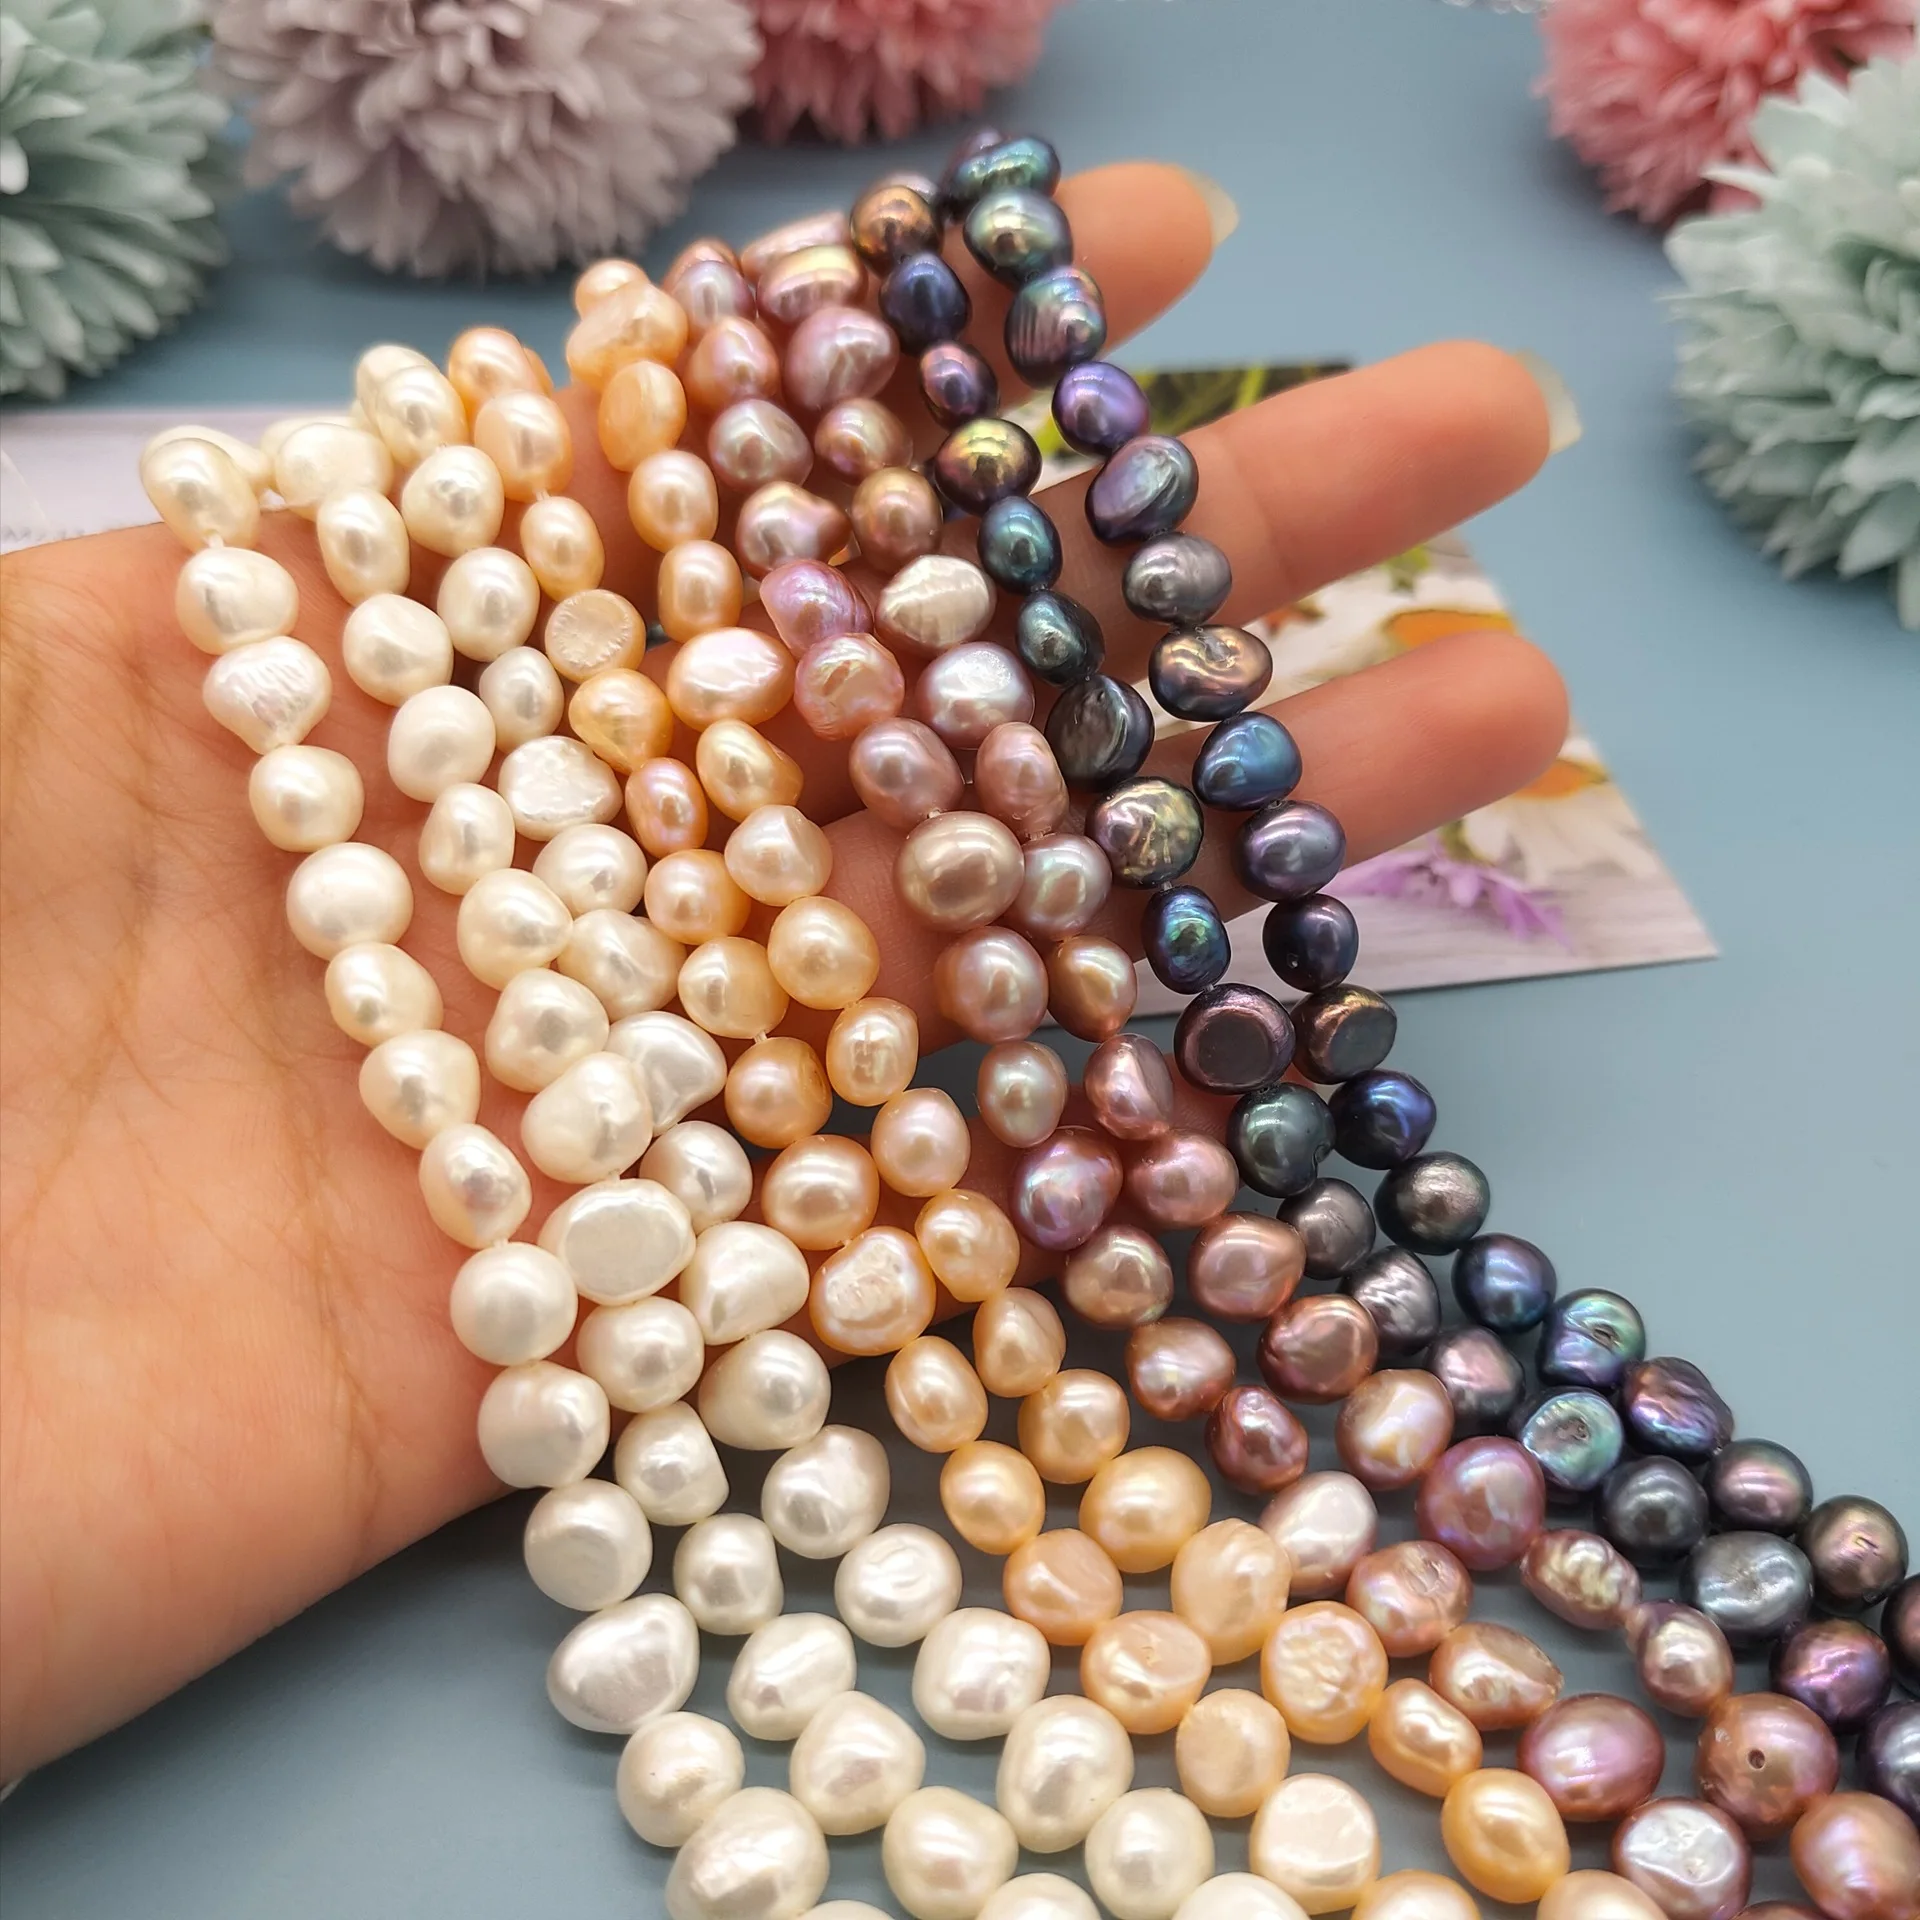 

Multi Colors Natural Baroque Freshwater Pearl Beads Irregular Round Loose Pearl Beads For Jewelry Making DIY Necklace Ring